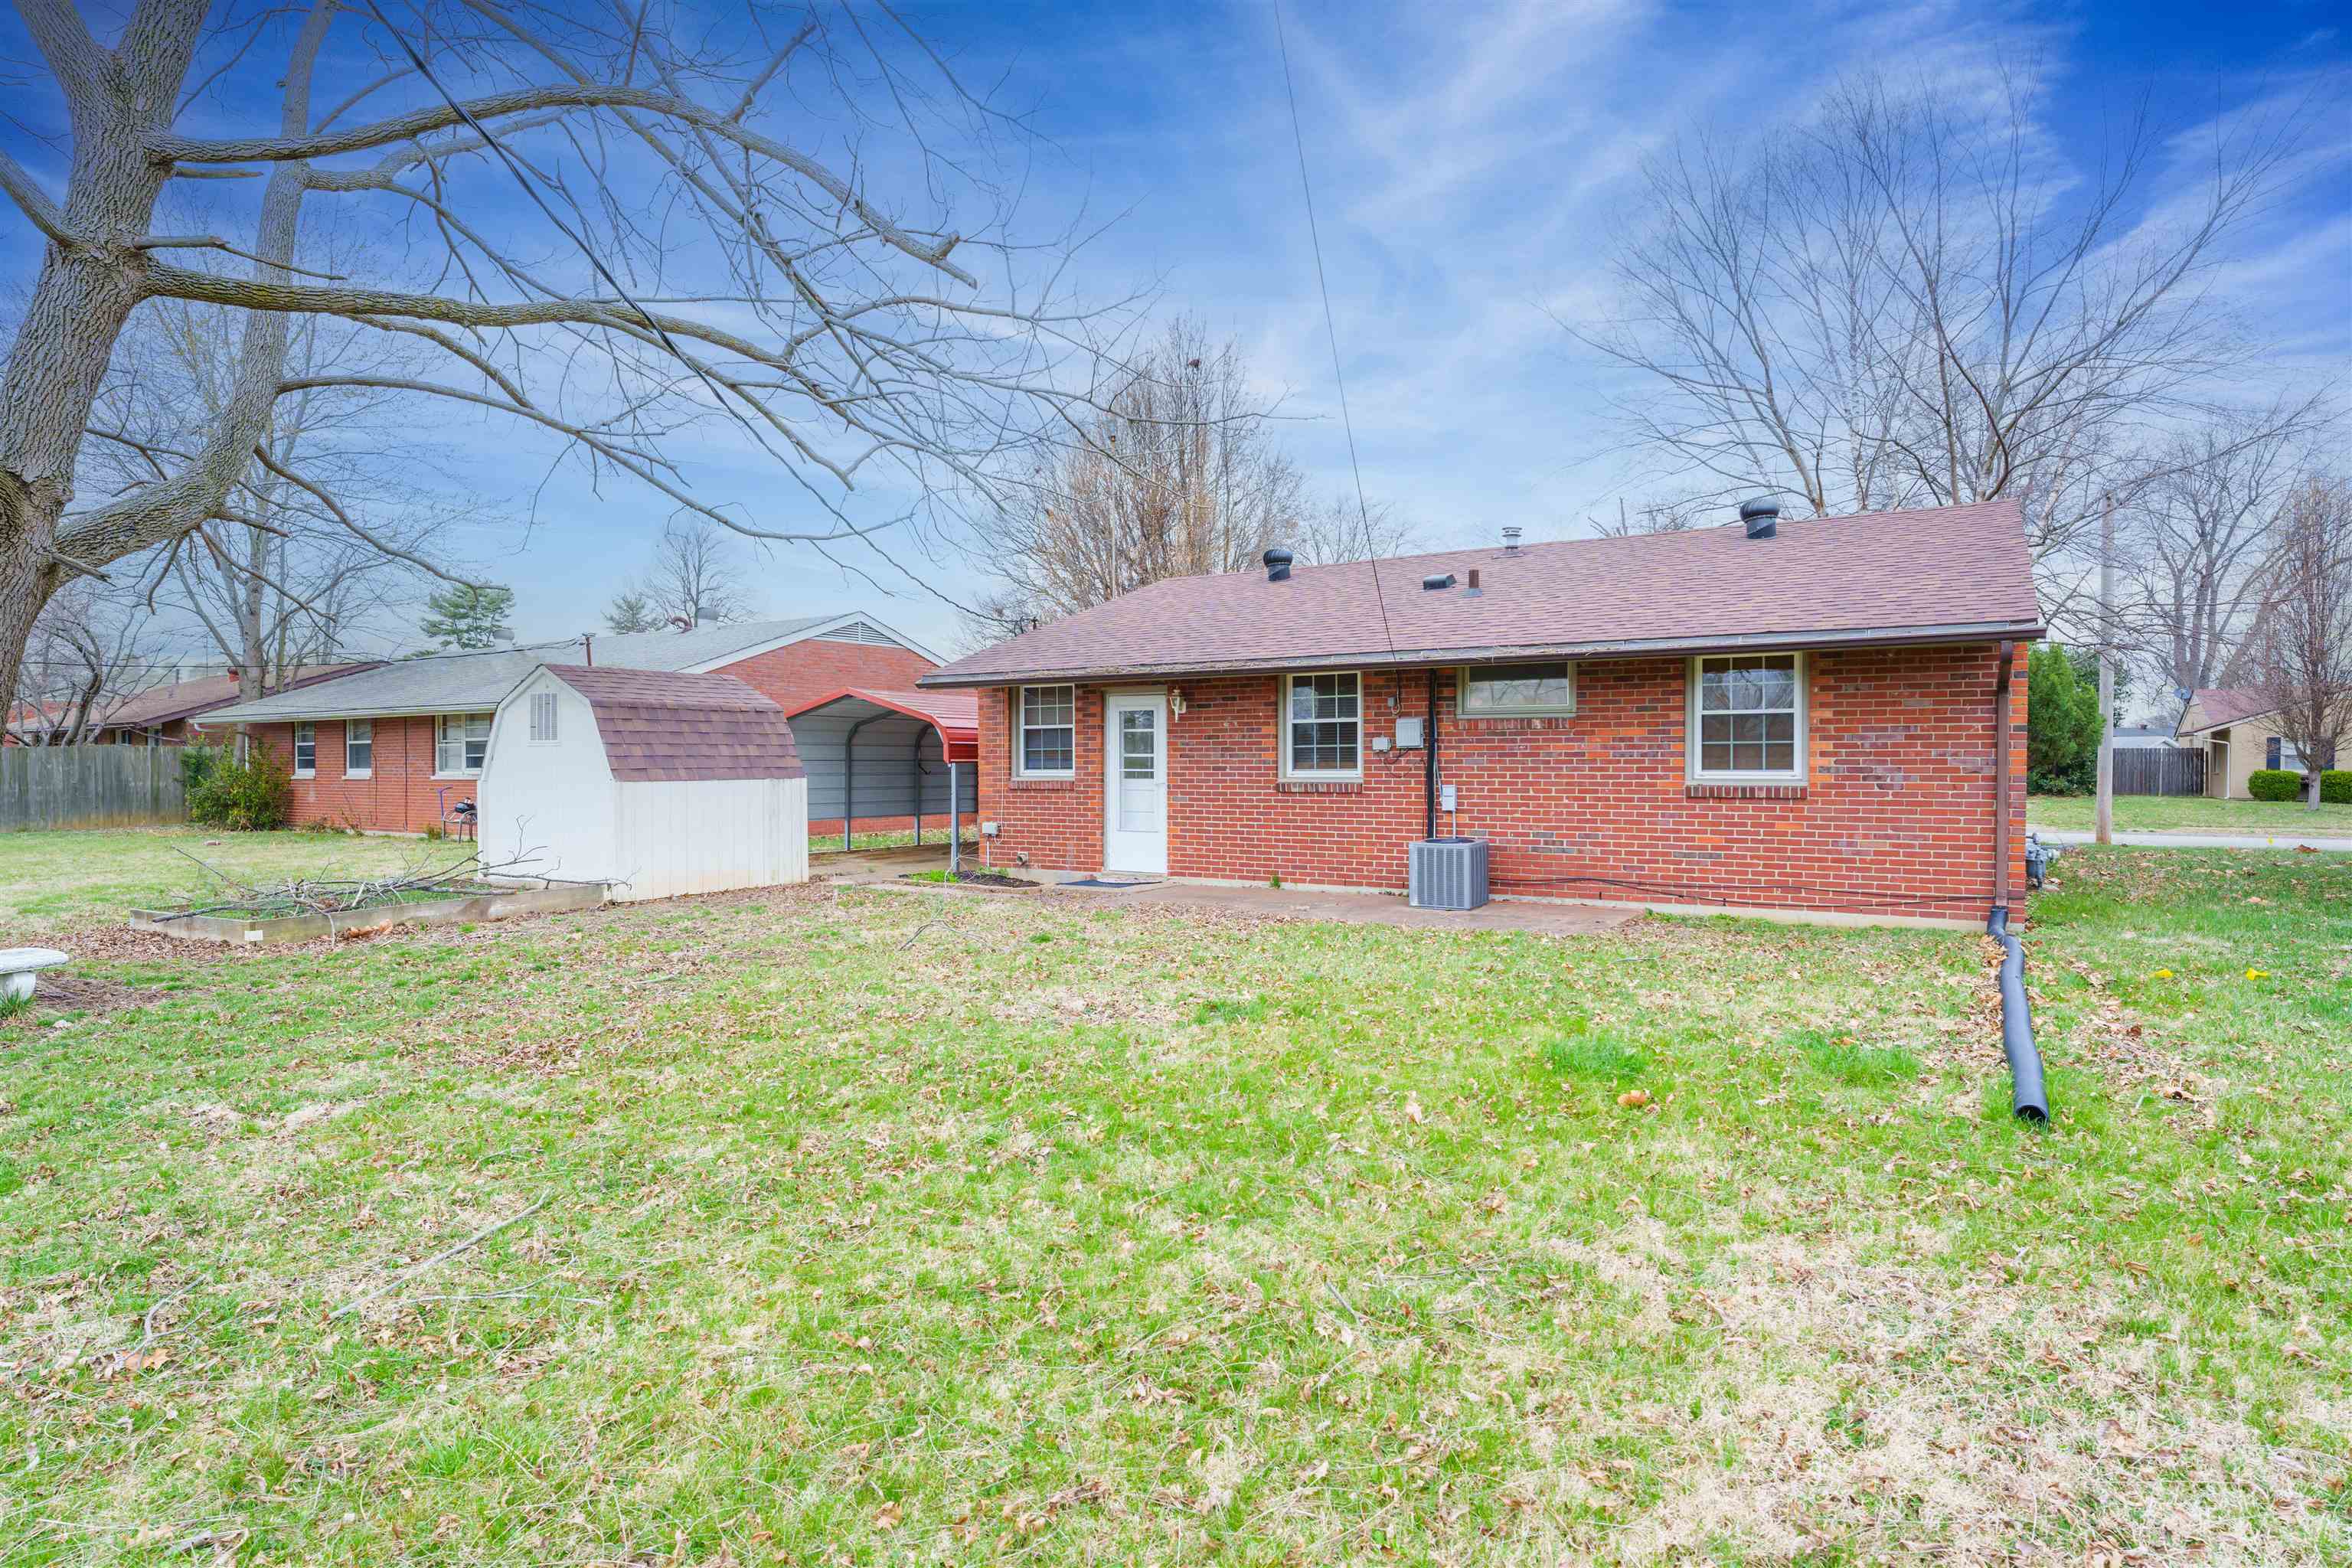 2060 Wyandotte Ave., Owensboro, Kentucky 42301, 3 Bedrooms Bedrooms, ,1 BathroomBathrooms,Single Family Residence,For Sale,Wyandotte Ave.,89133